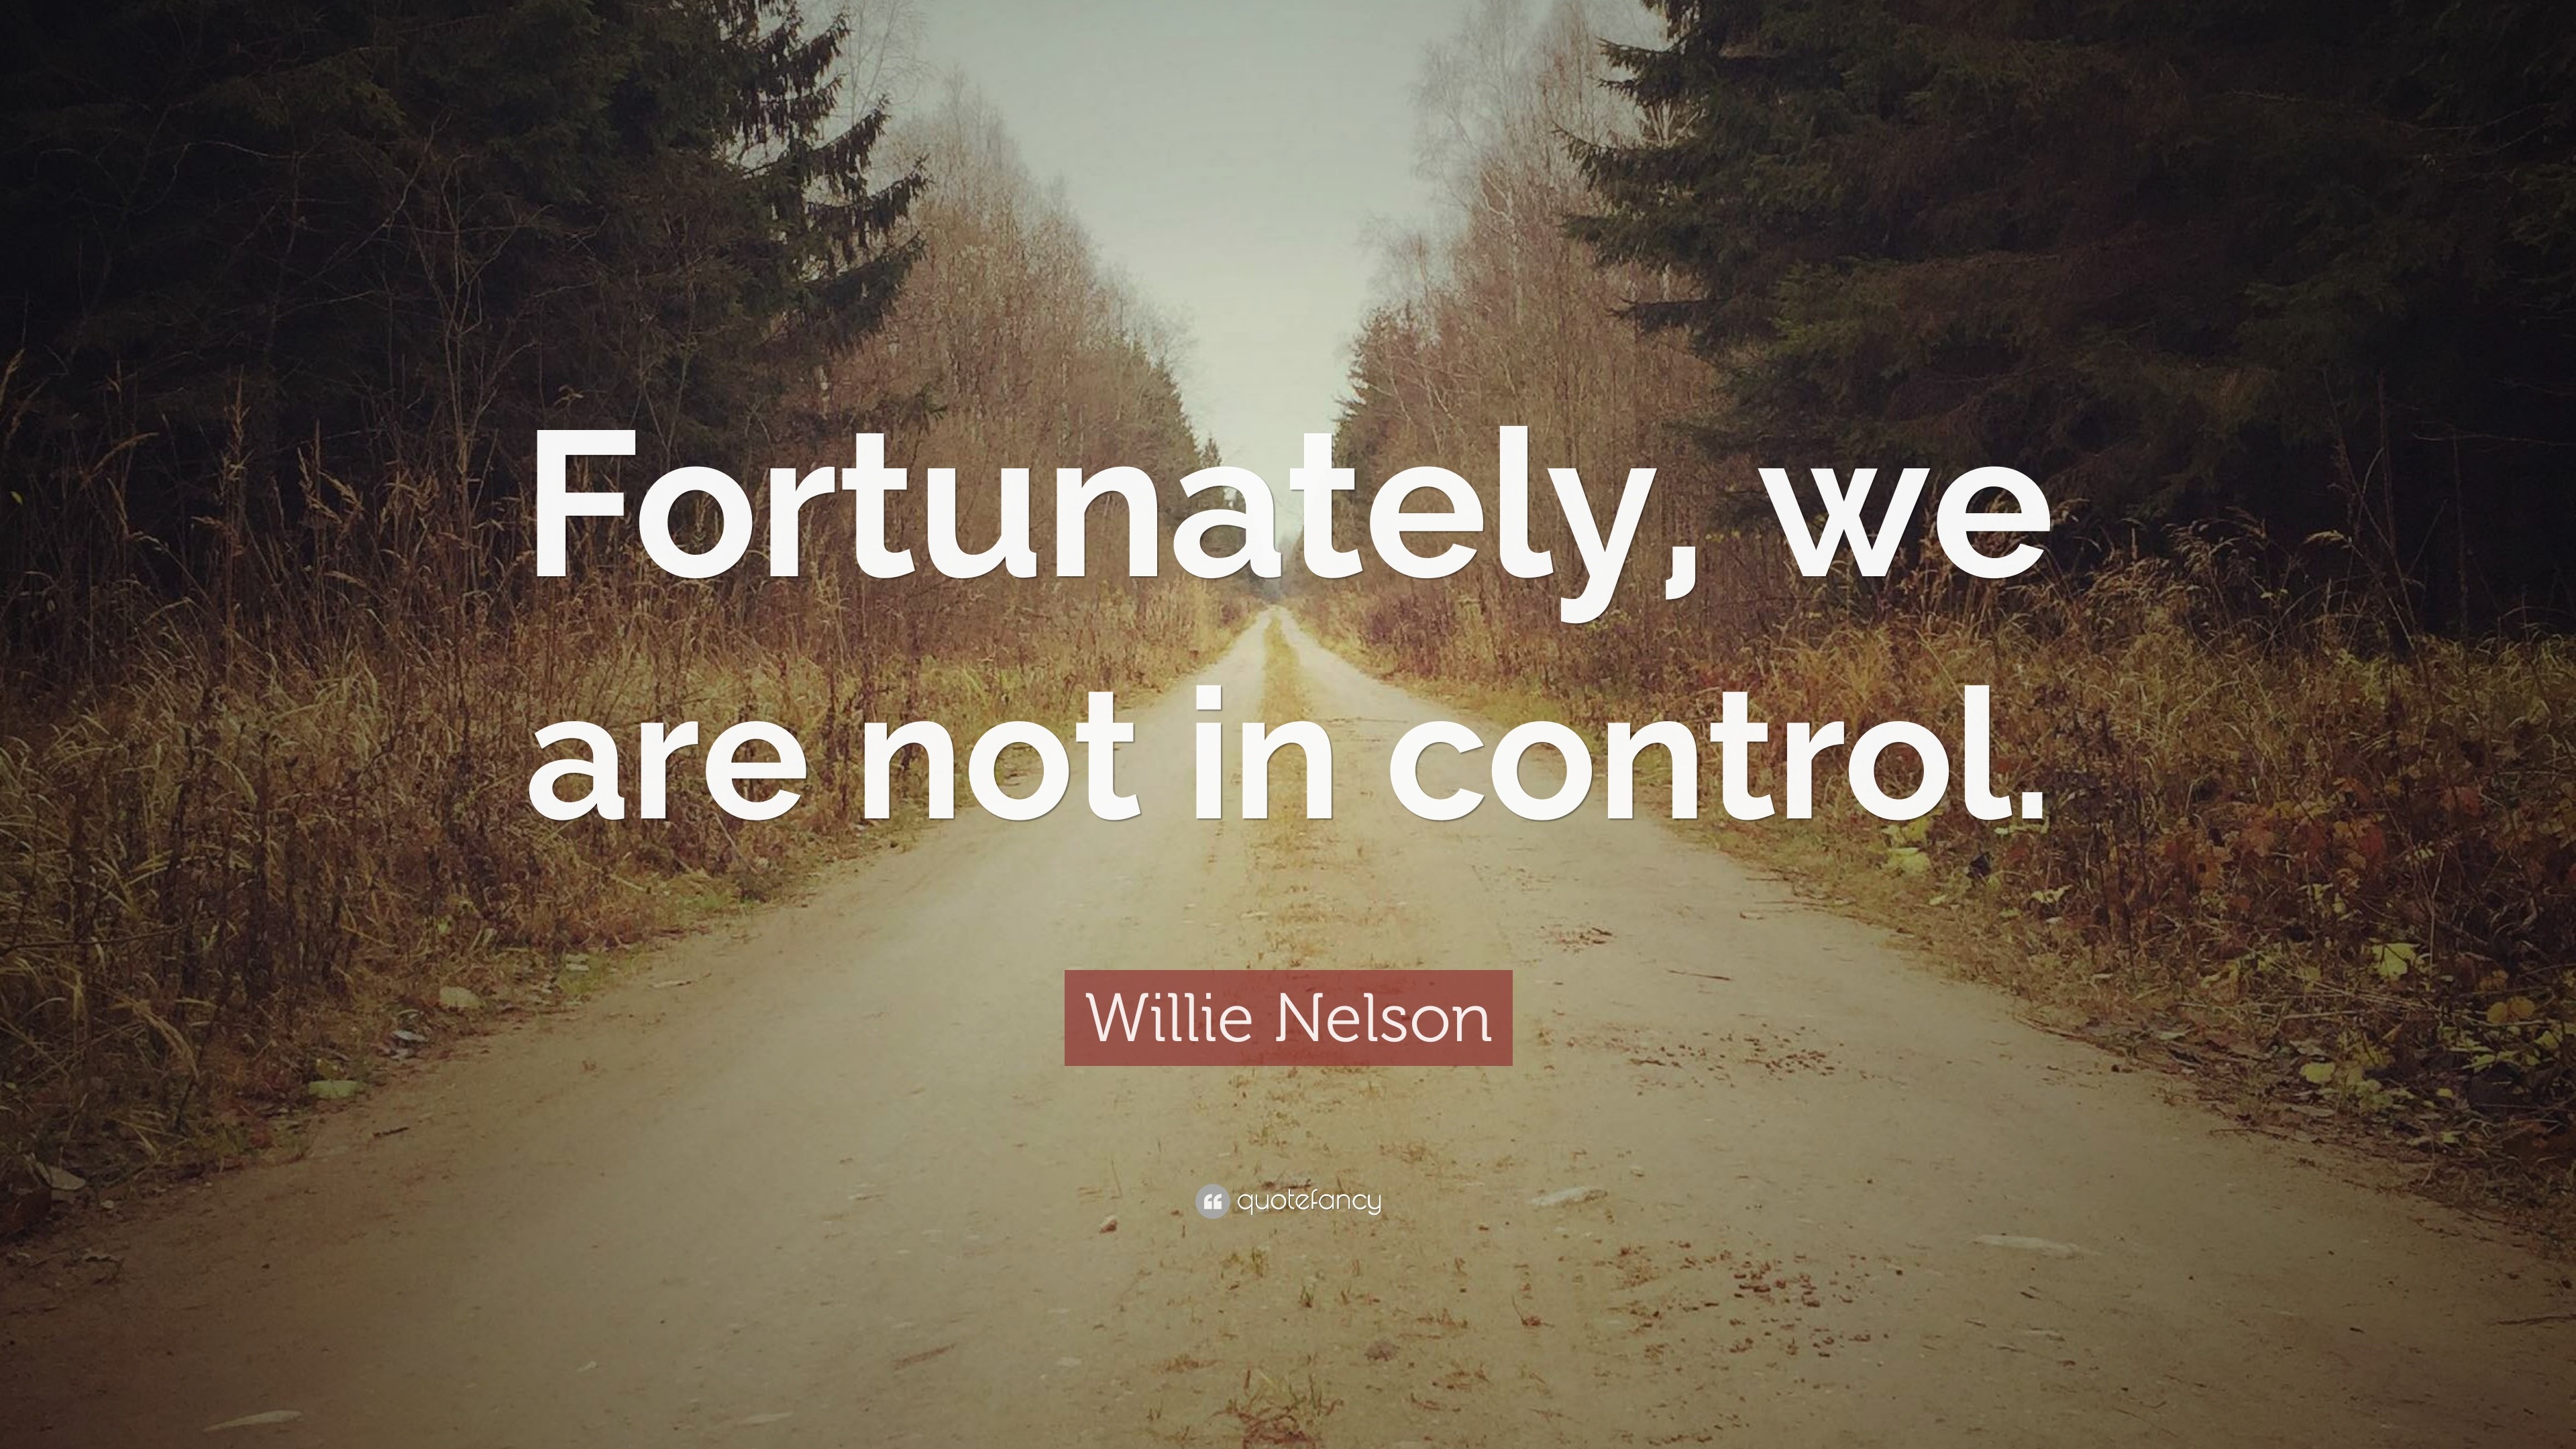 3840x2160 Willie Nelson Quote: “Fortunately, we are not in control.”